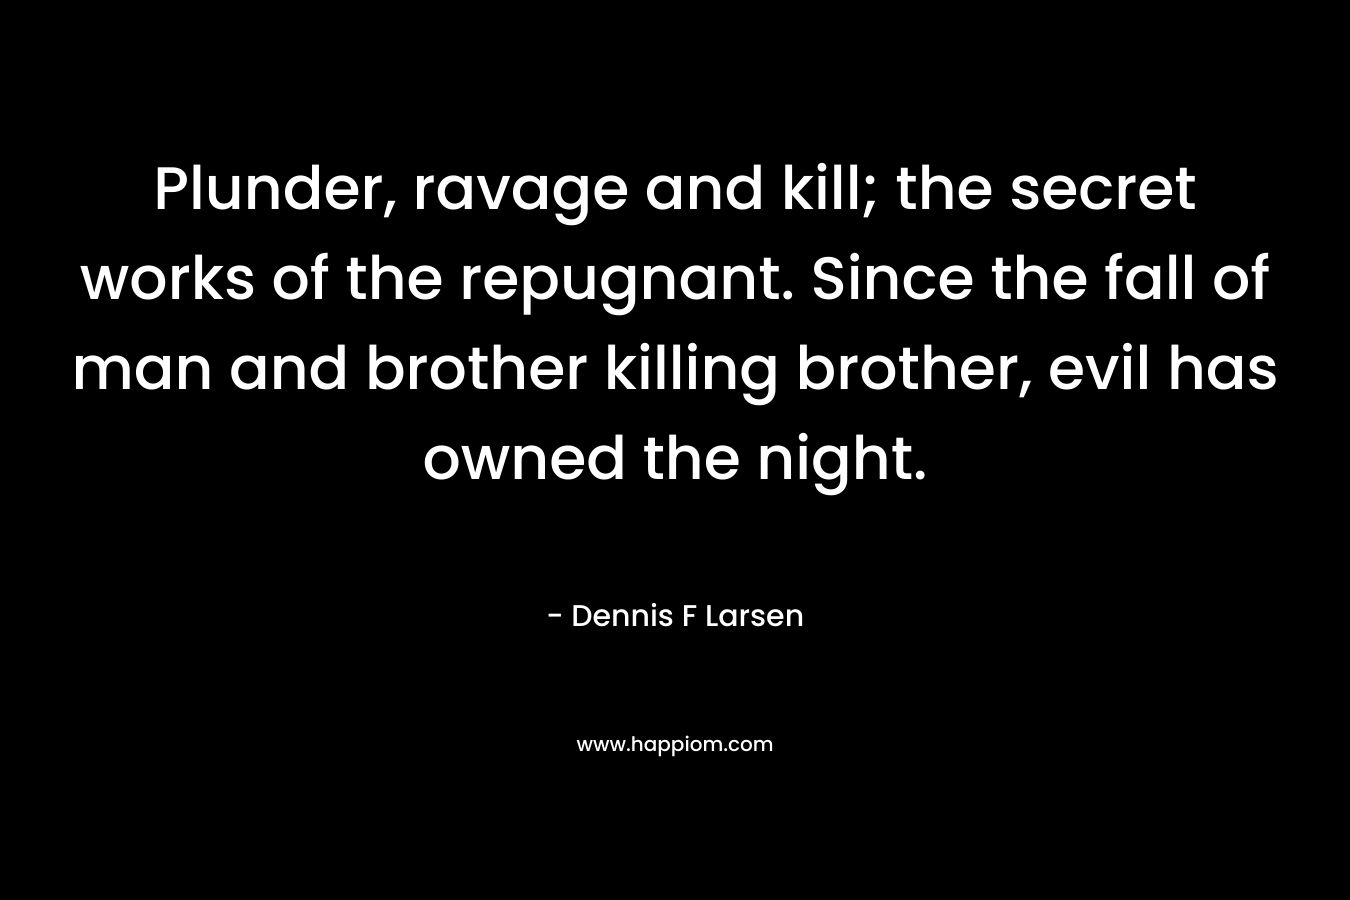 Plunder, ravage and kill; the secret works of the repugnant. Since the fall of man and brother killing brother, evil has owned the night. – Dennis F Larsen